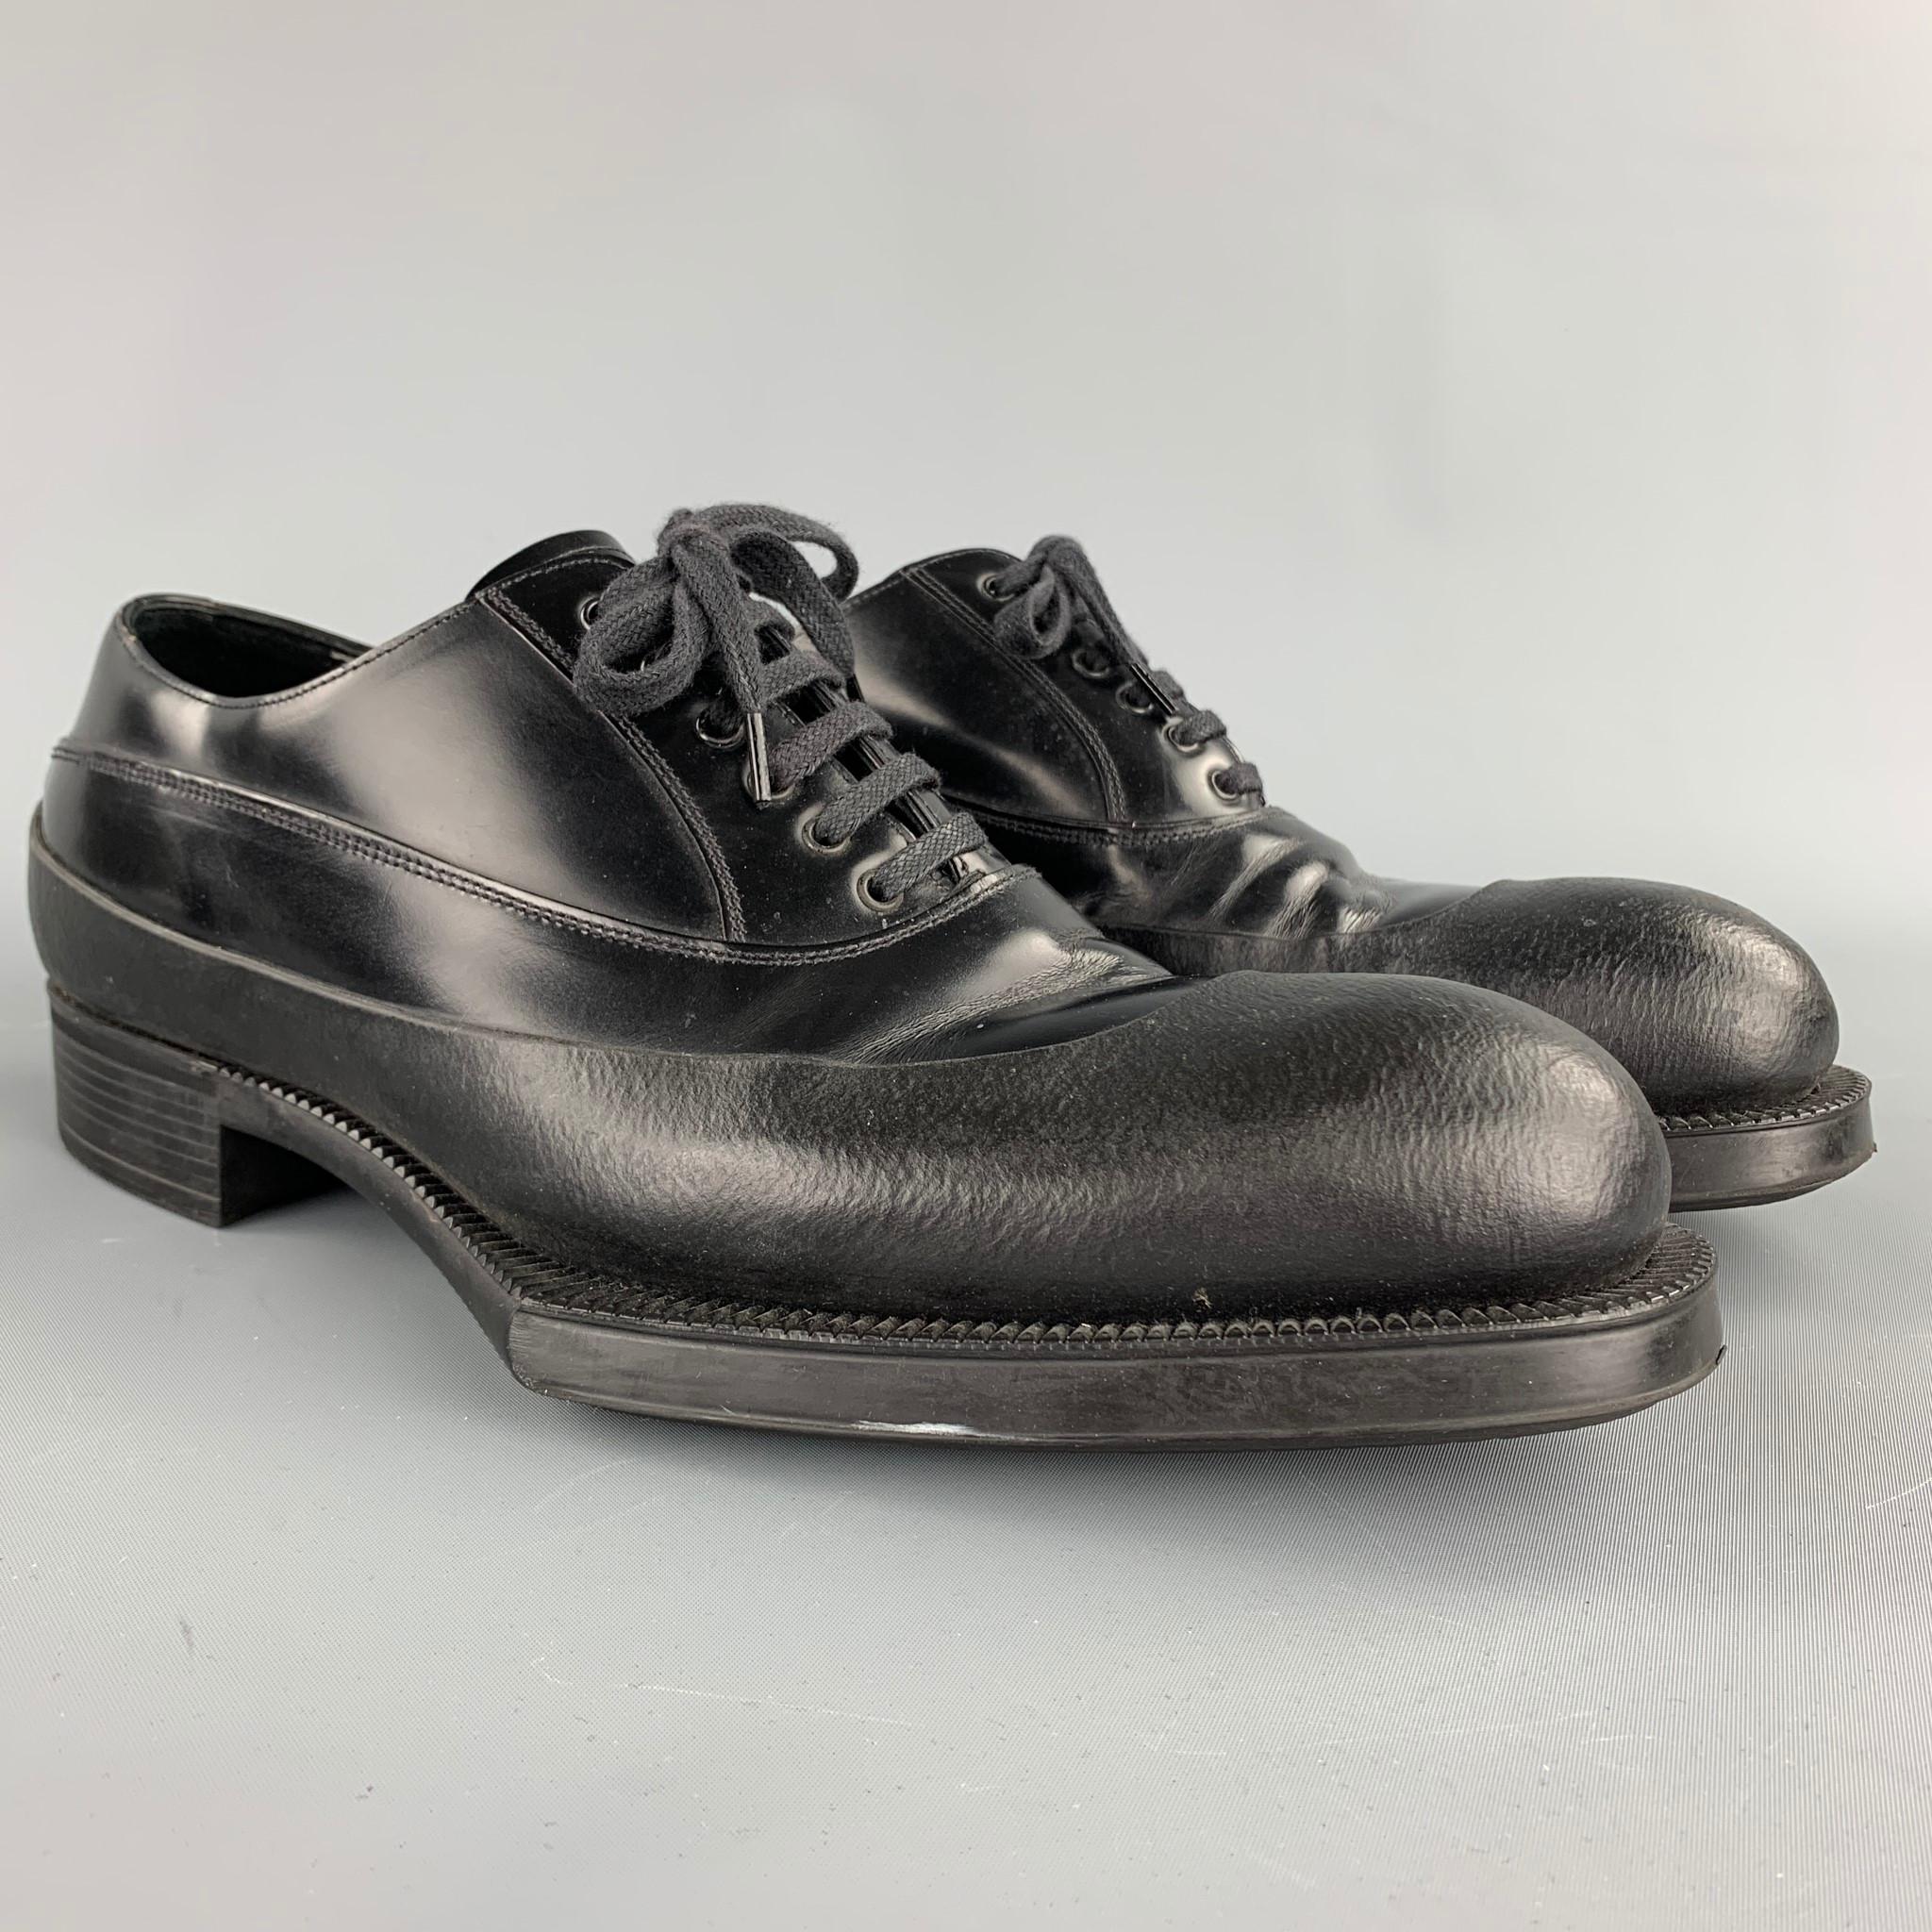 PRADA dress shoes comes in a black leather featuring a structured rubber sole, cap toe, and a lace up closure. Made in Italy.

Very Good Pre-Owned Condition.
Marked: UK 8.5

Measurements:

Outsole: 12.5 in. x 4.5 in. 